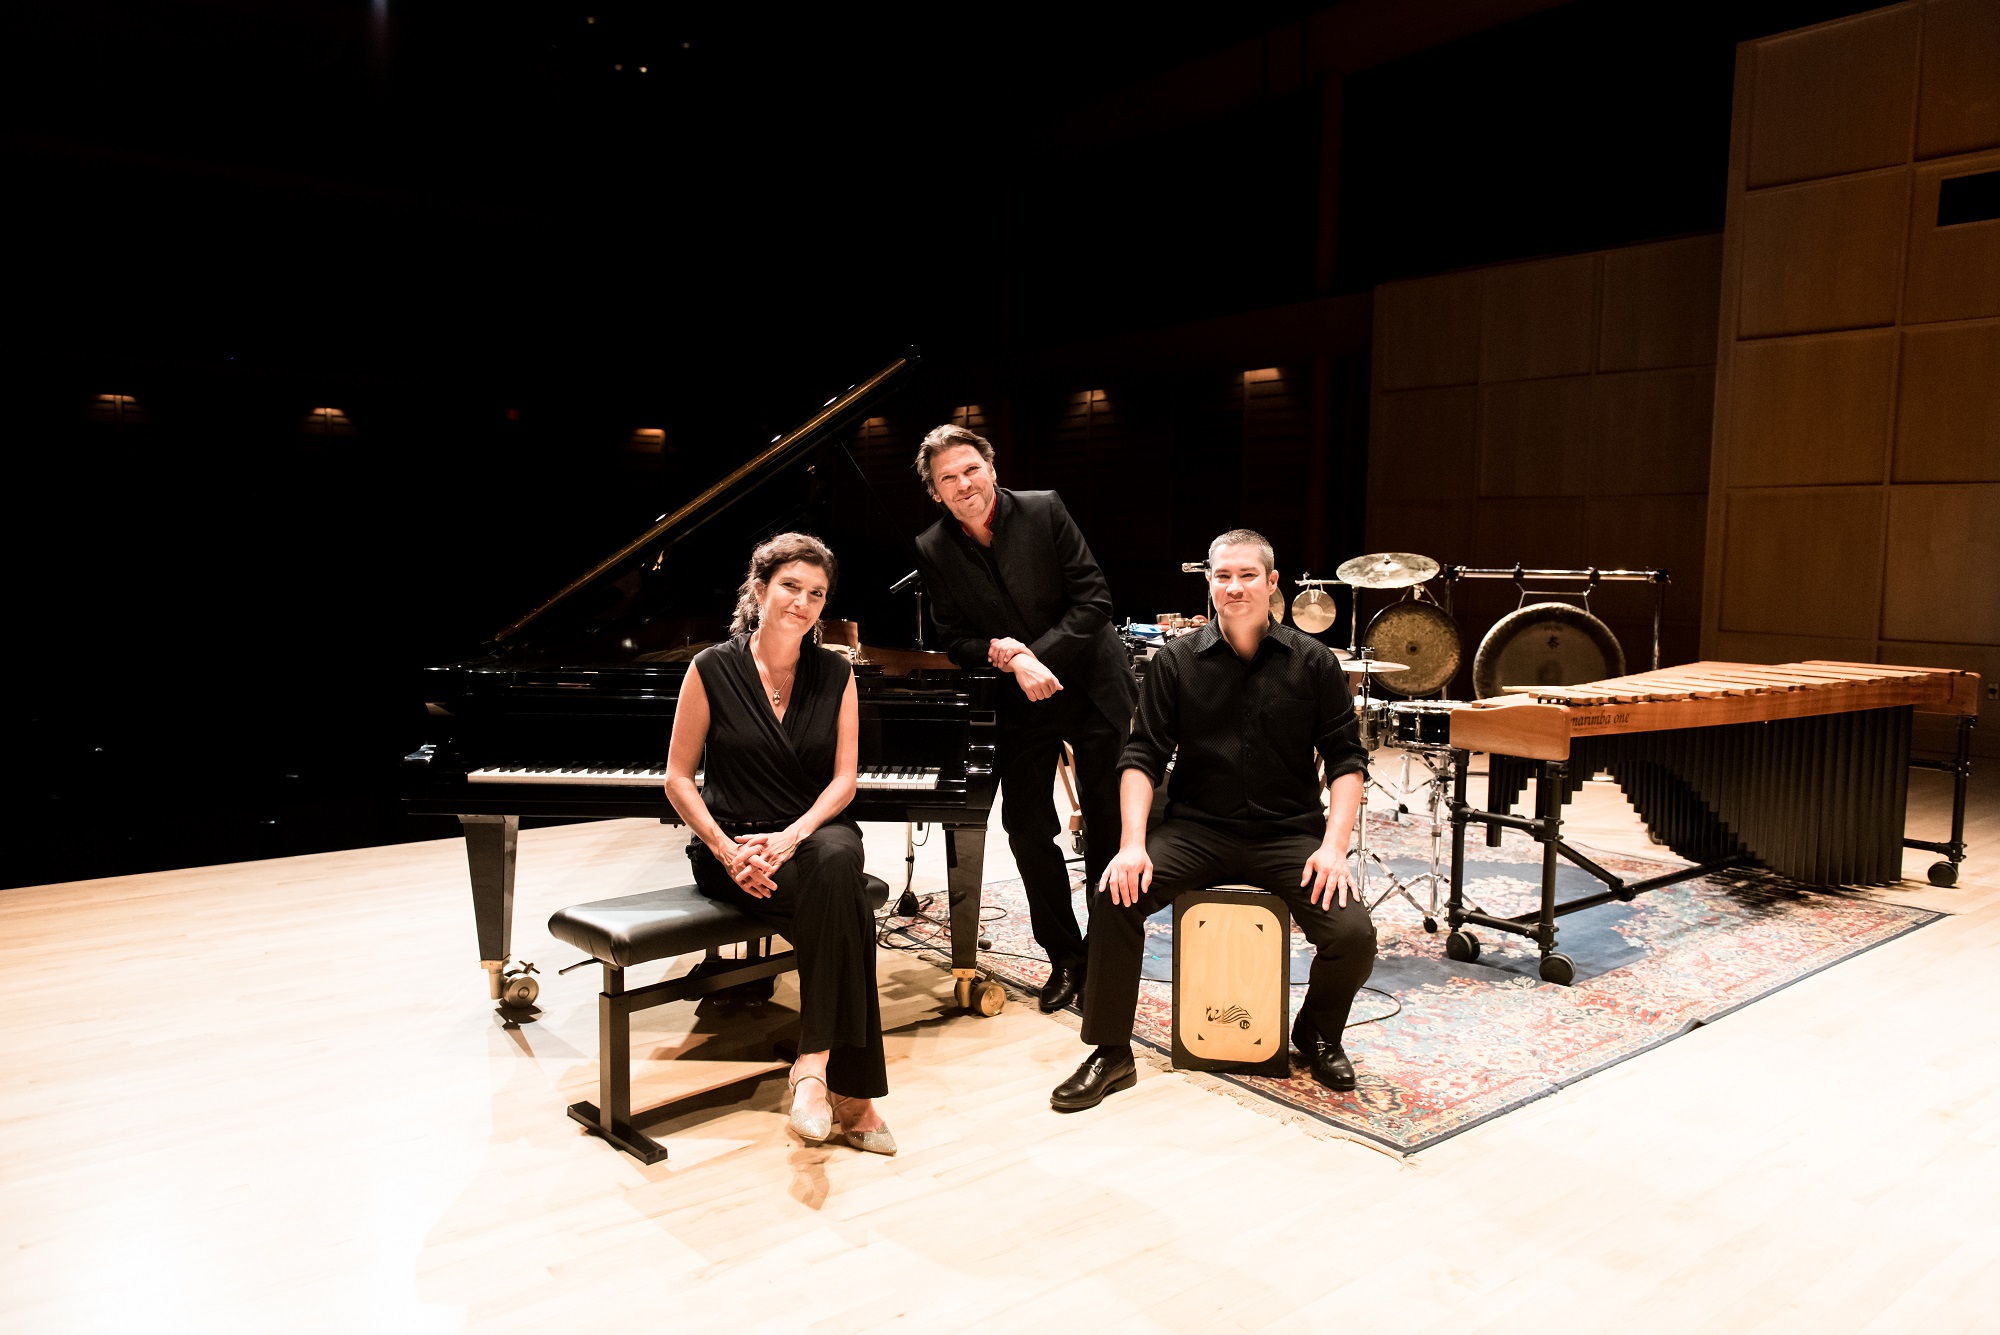 Piano and percussion merge in a 6-handed musical marvel at The Bailey Theatre